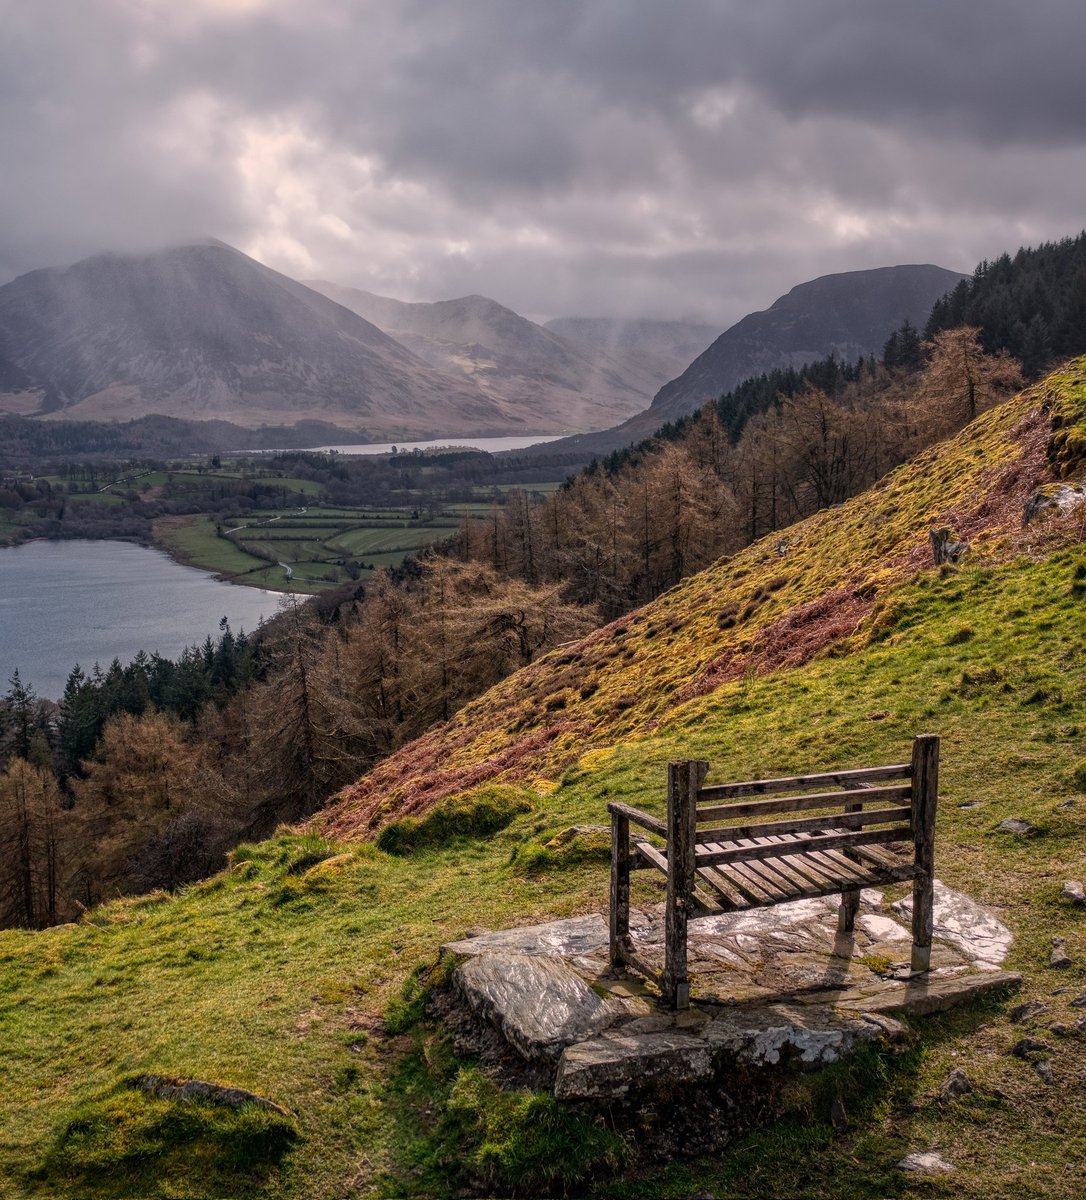 Morning everyone hope you are well. Sunshine and showers. A seat with a view illuminated by early morning light as showers sweep through Crummock Water. Have a great day. #LakeDistrict @keswickbootco